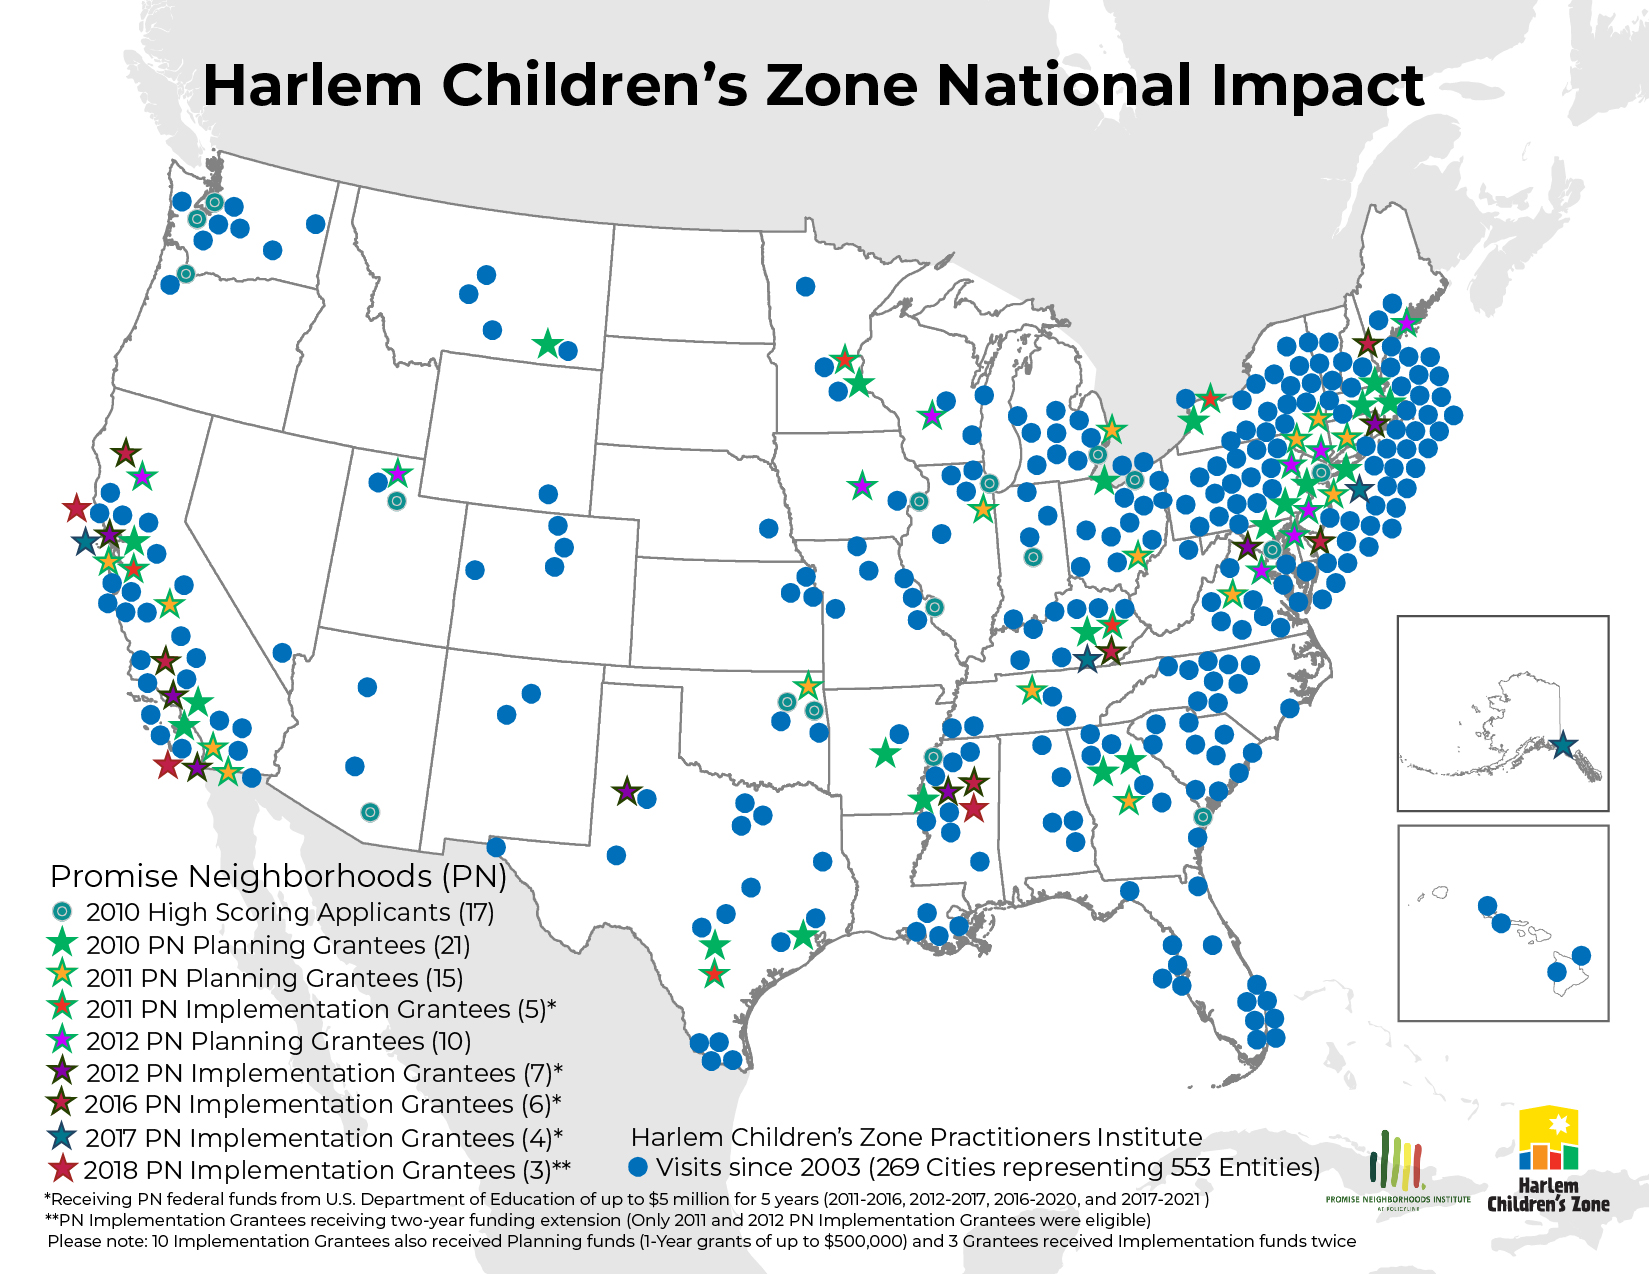 U.S. Map of HCZ National Impact including Promise Neighborhoods and Practitioners Institute visits